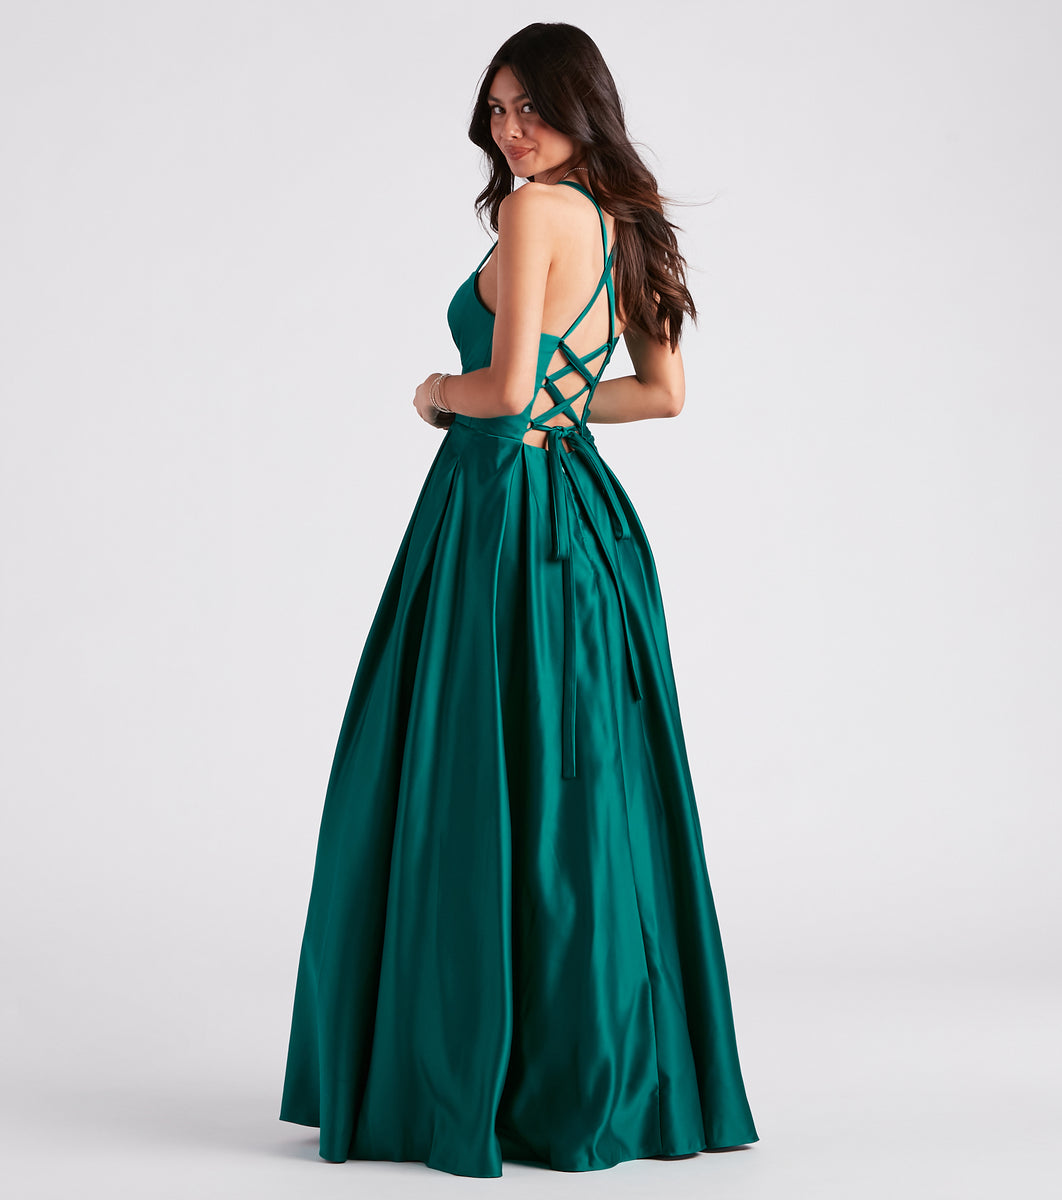 Jane Satin Lace-Up A-Line Ball Gown